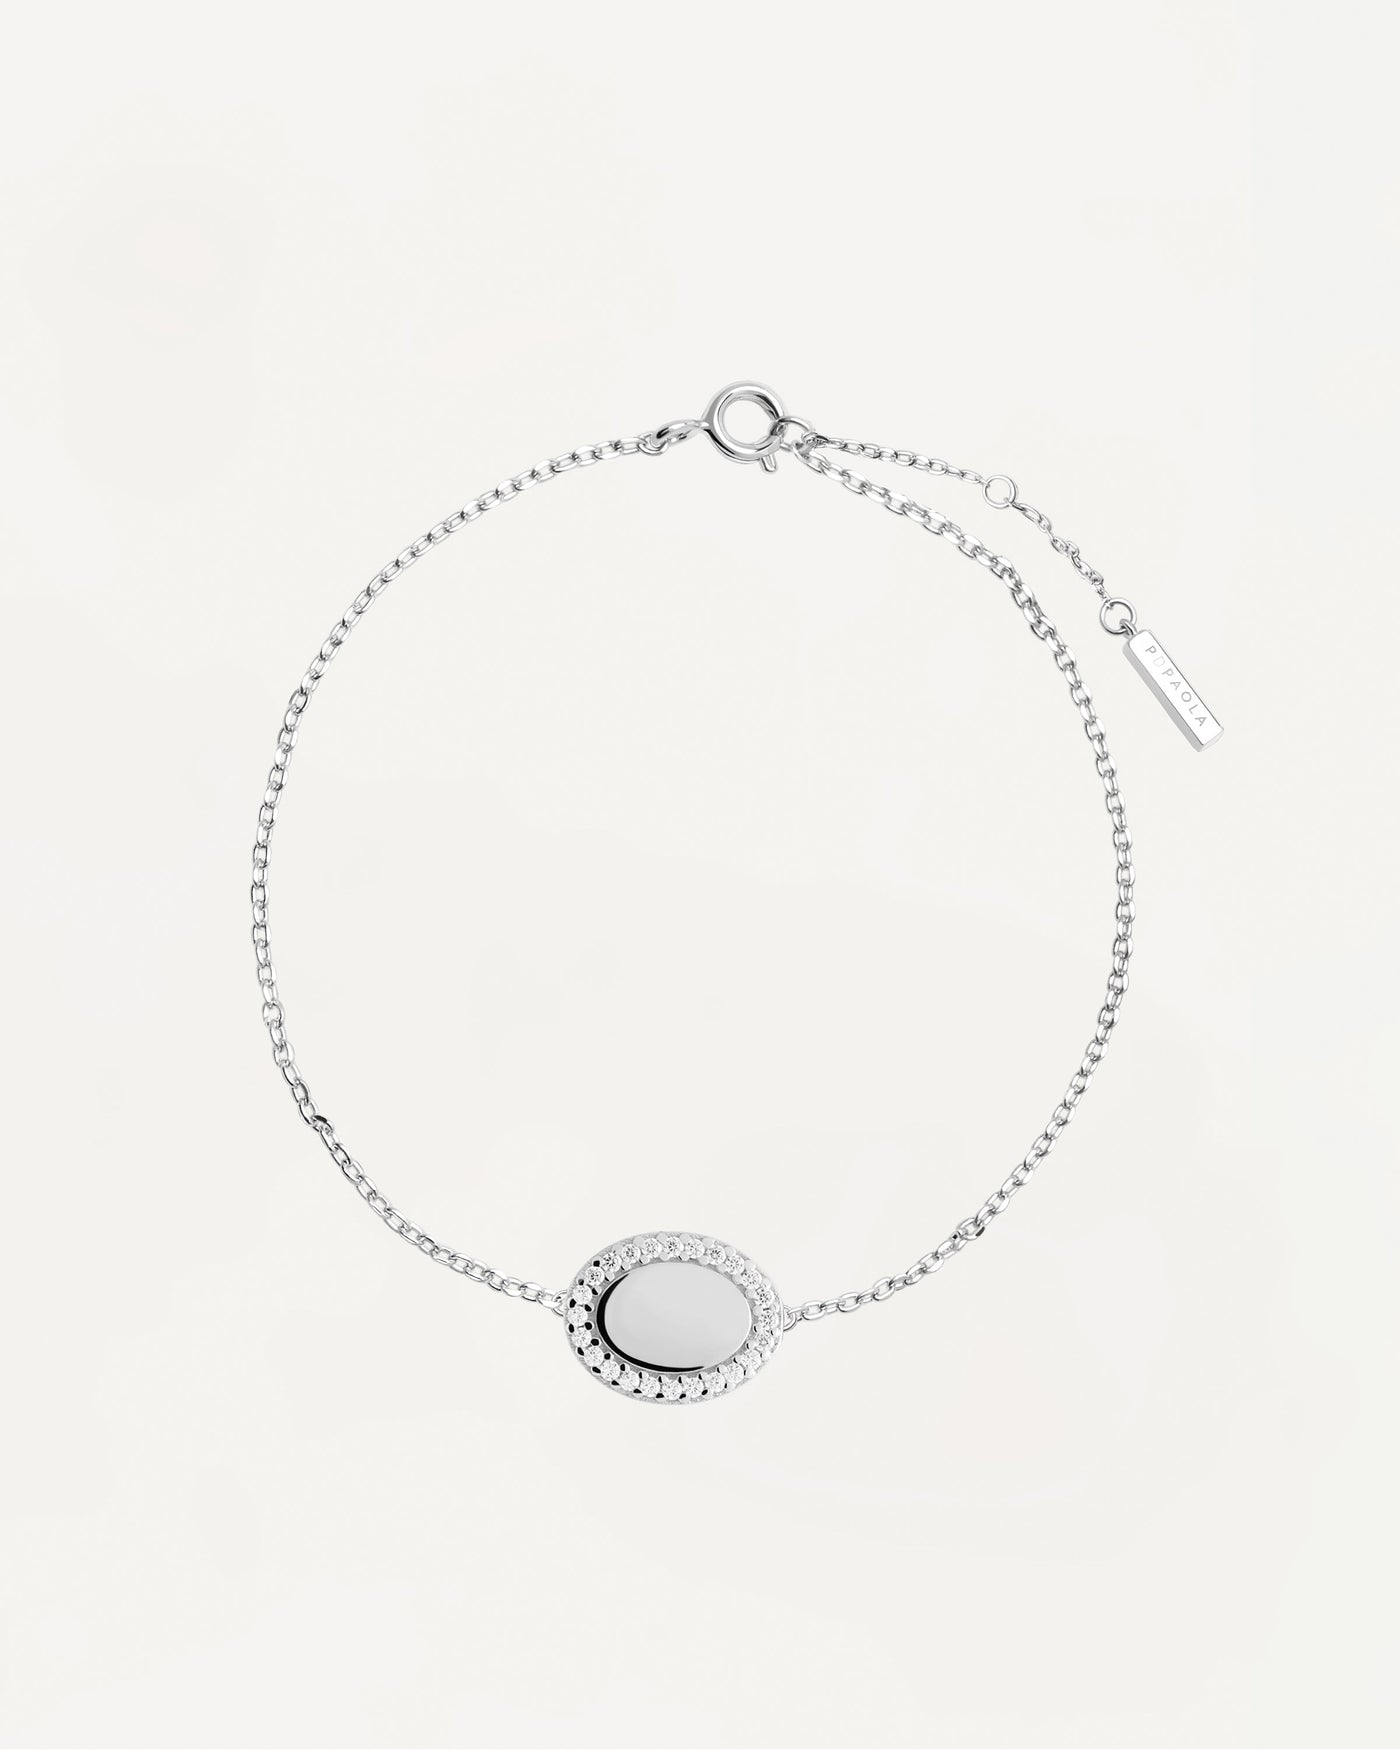 2023 Selection | Mademoiselle Silver Bracelet. 925 silver bracelet with engravable pendant circled by white zirconia. Get the latest arrival from PDPAOLA. Place your order safely and get this Best Seller. Free Shipping.